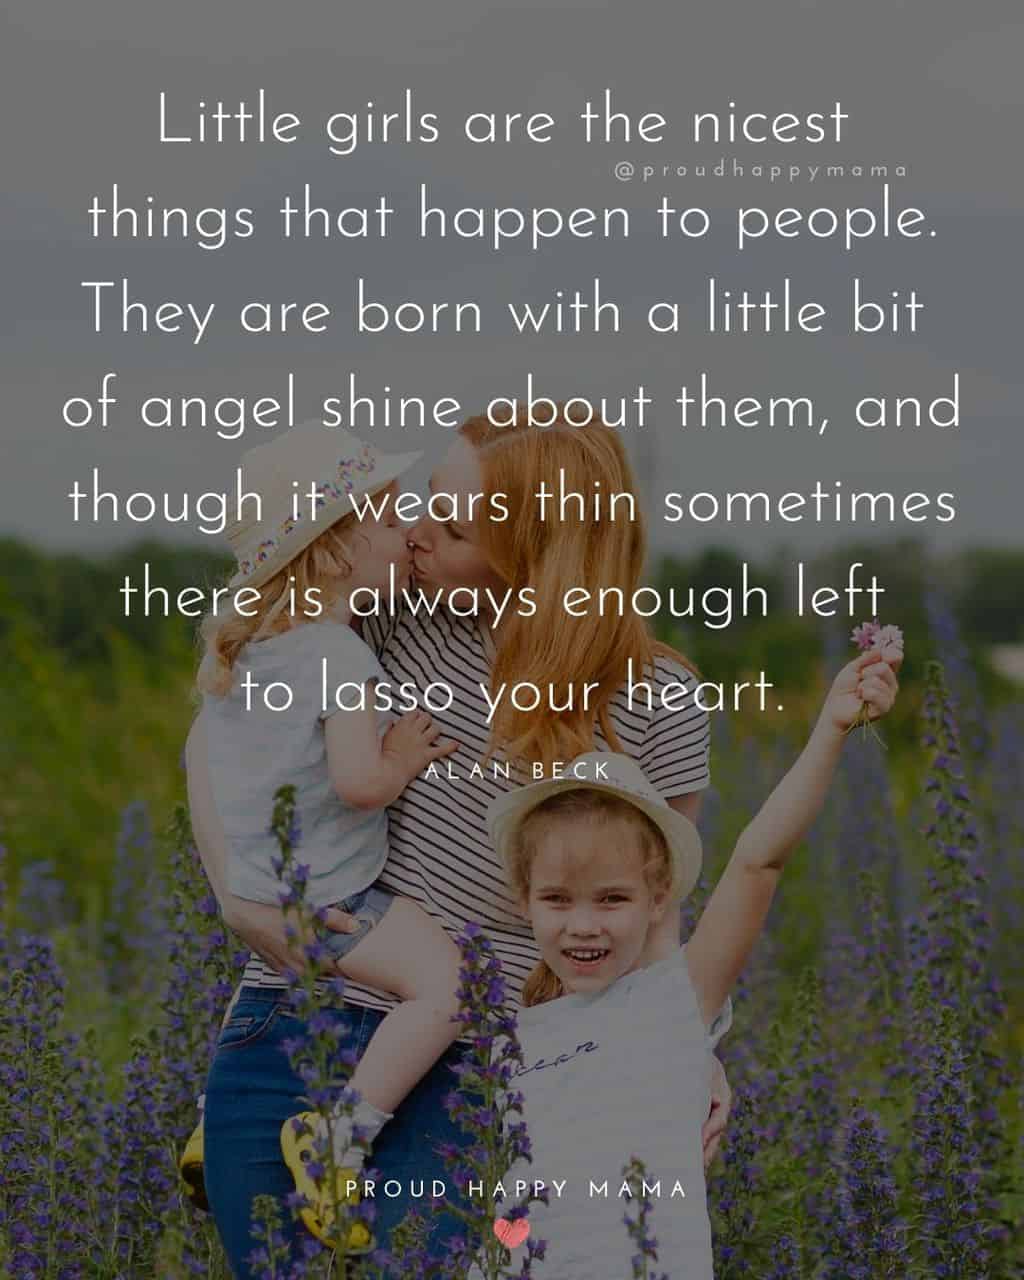 to my daughter quote - Little girls are the nicest things that happen to people. They are born with a little bit of angel shine about them, and